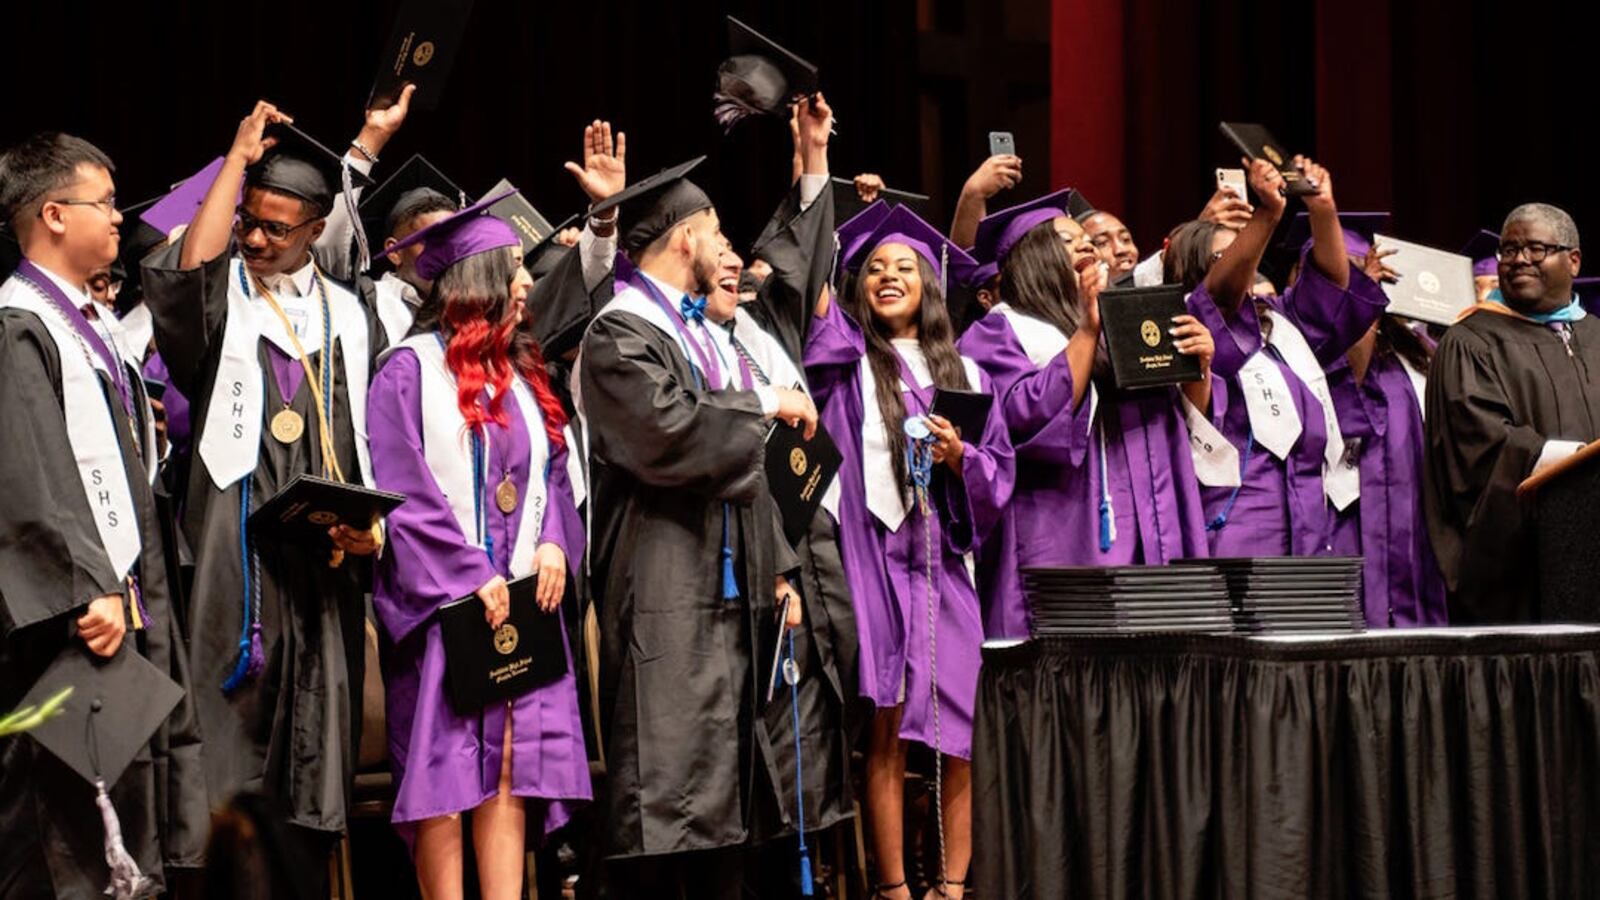 Southwind High School's Class of 2019 celebrates its graduation in May in Memphis. The Shelby County school finished with a 2019 graduation rate of more than 85%.